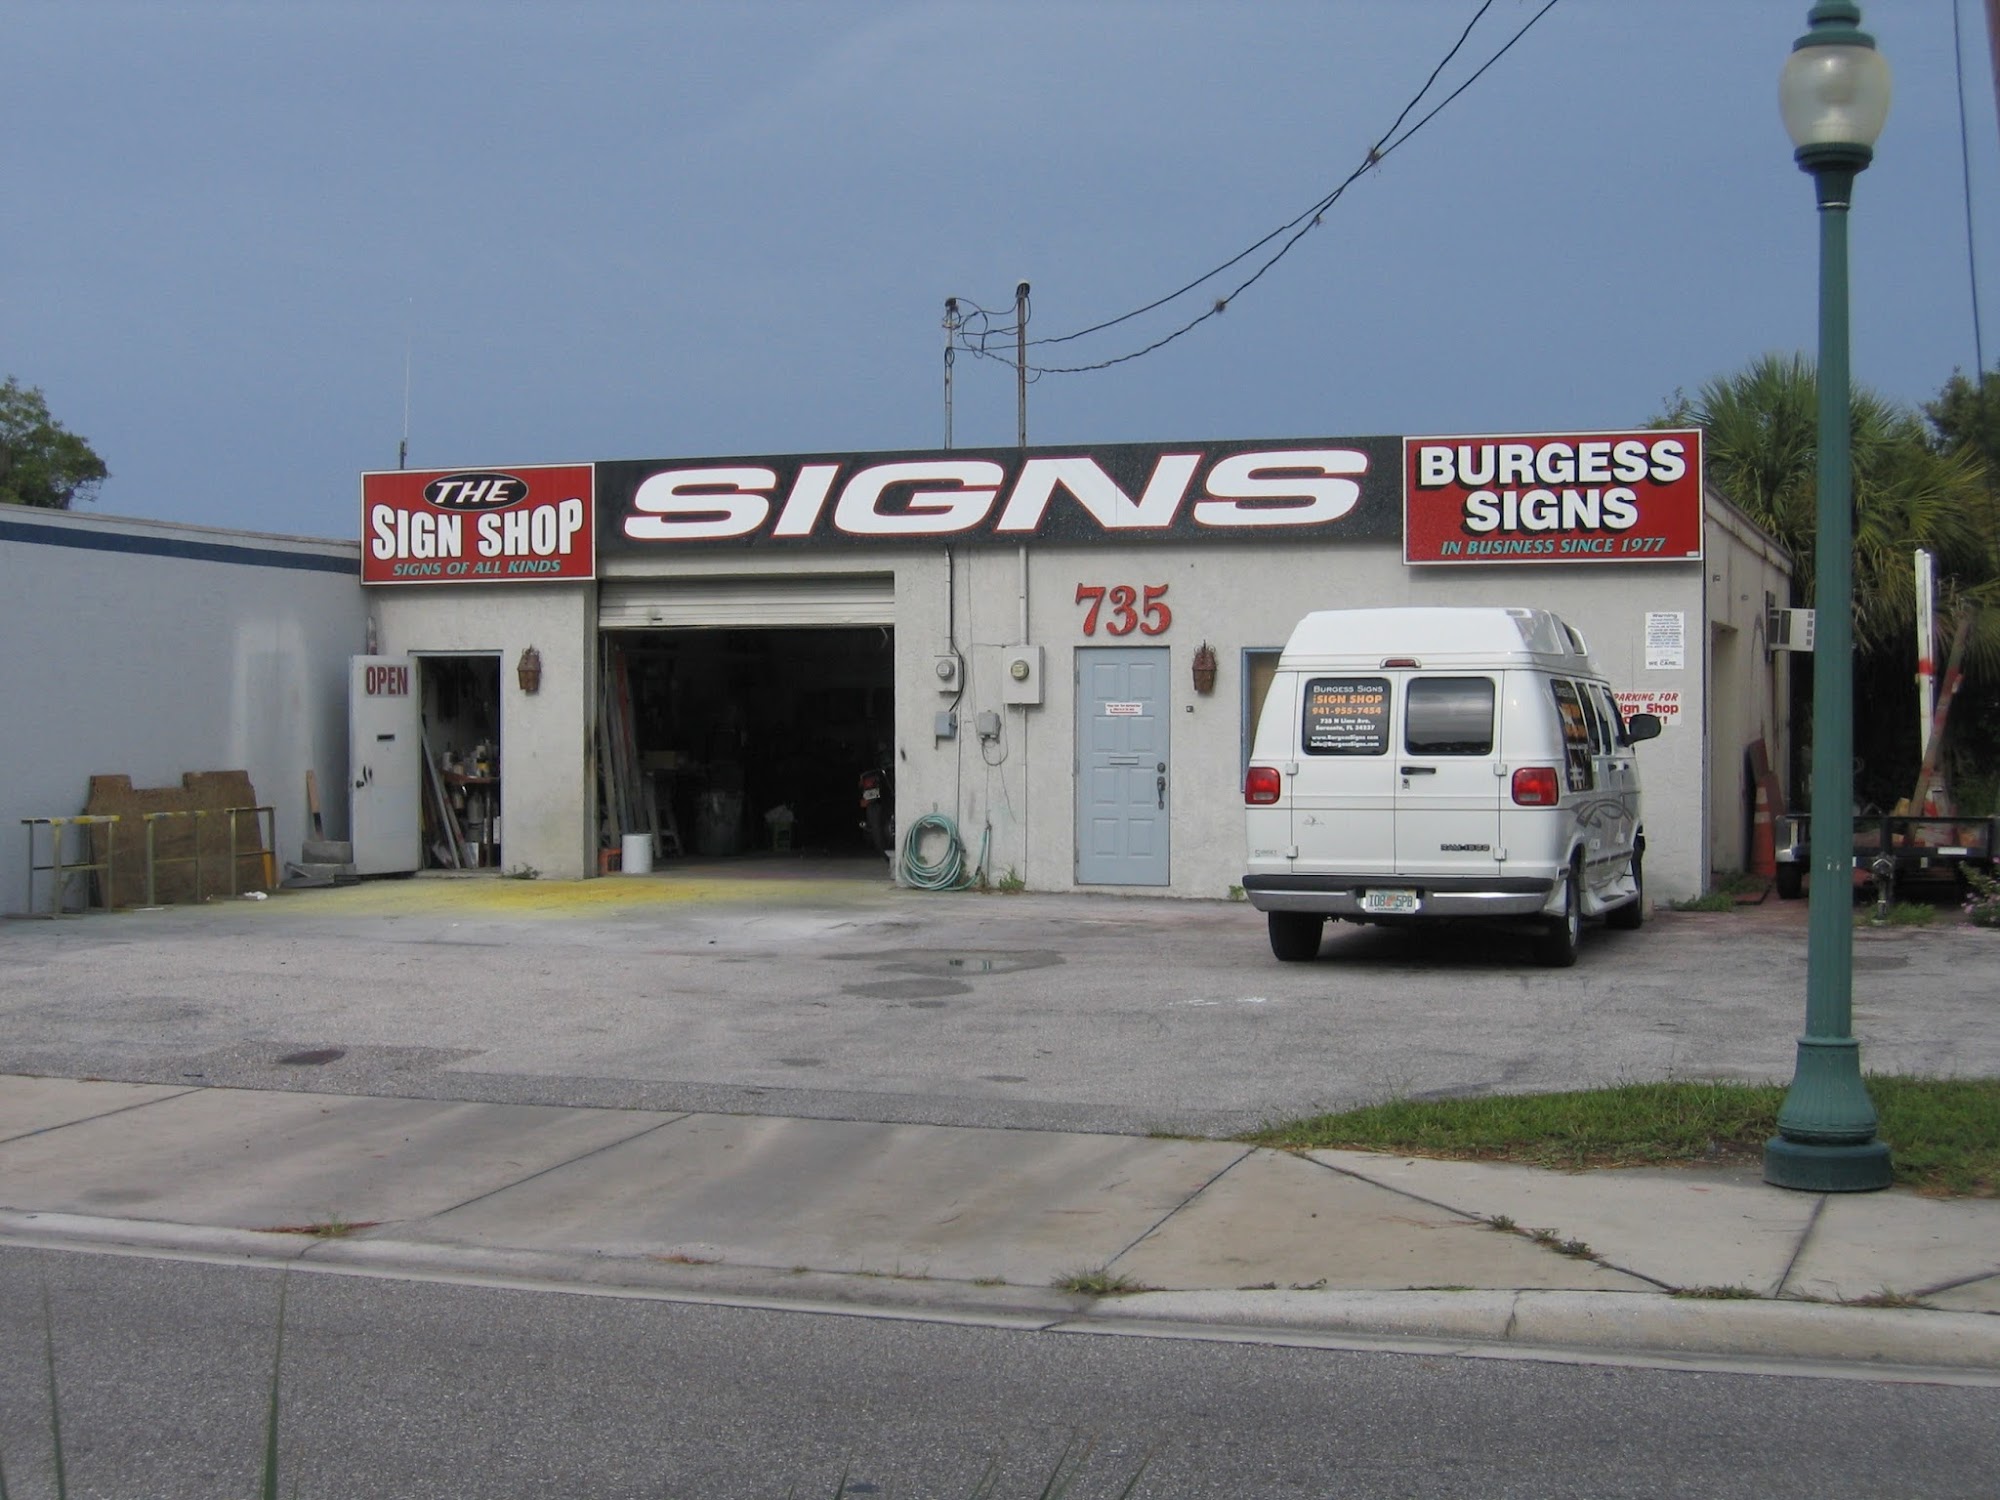 Burgess Signs, Inc. / The Sign Shop